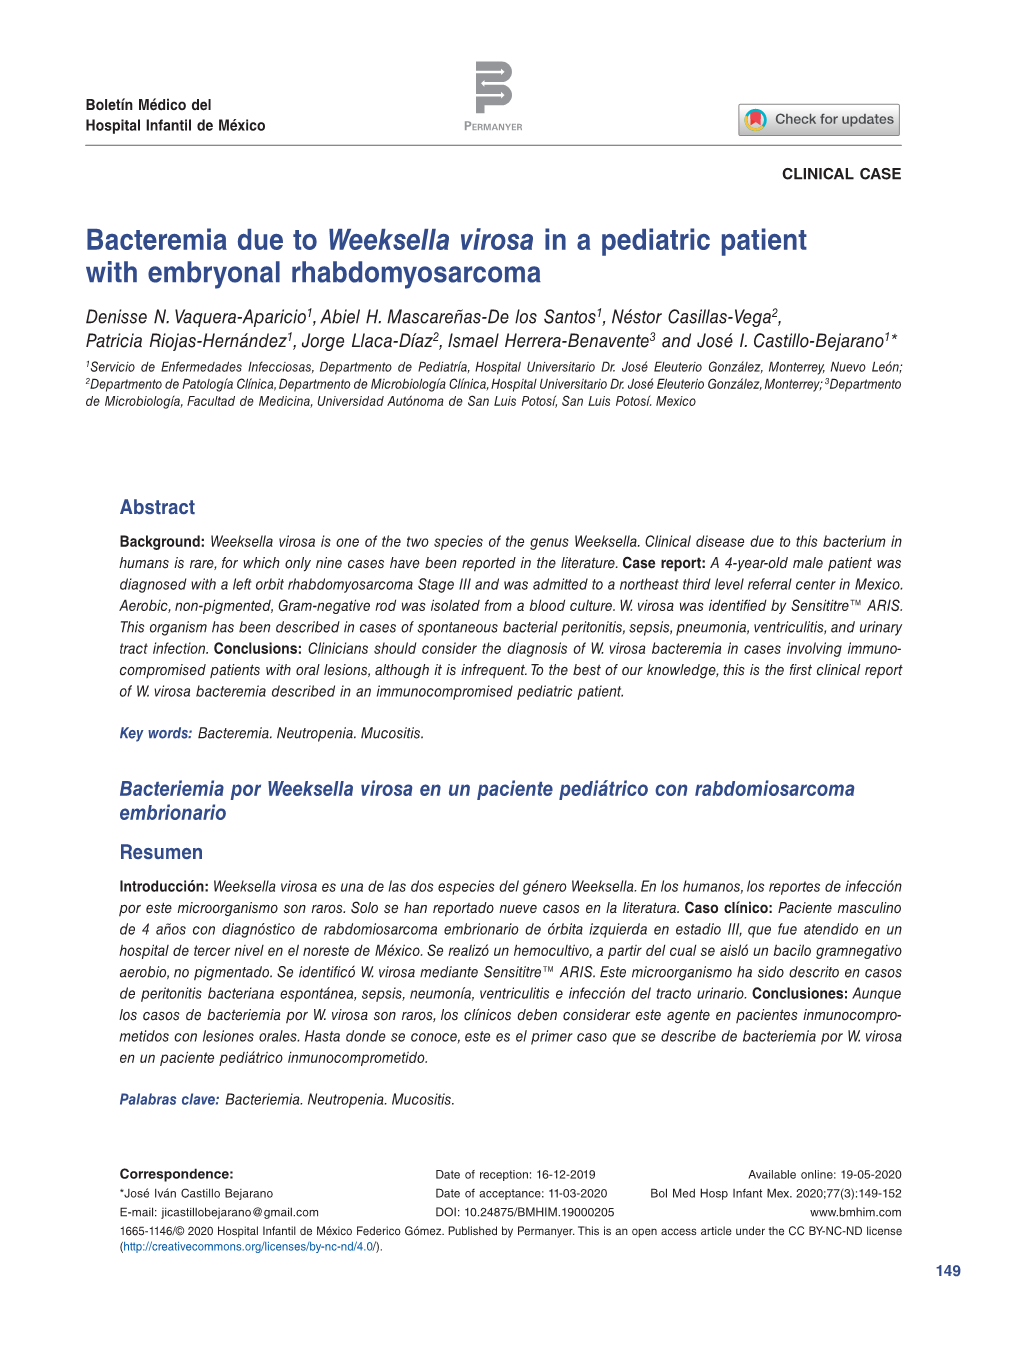 Bacteremia Due to Weeksella Virosa in a Pediatric Patient with Embryonal Rhabdomyosarcoma